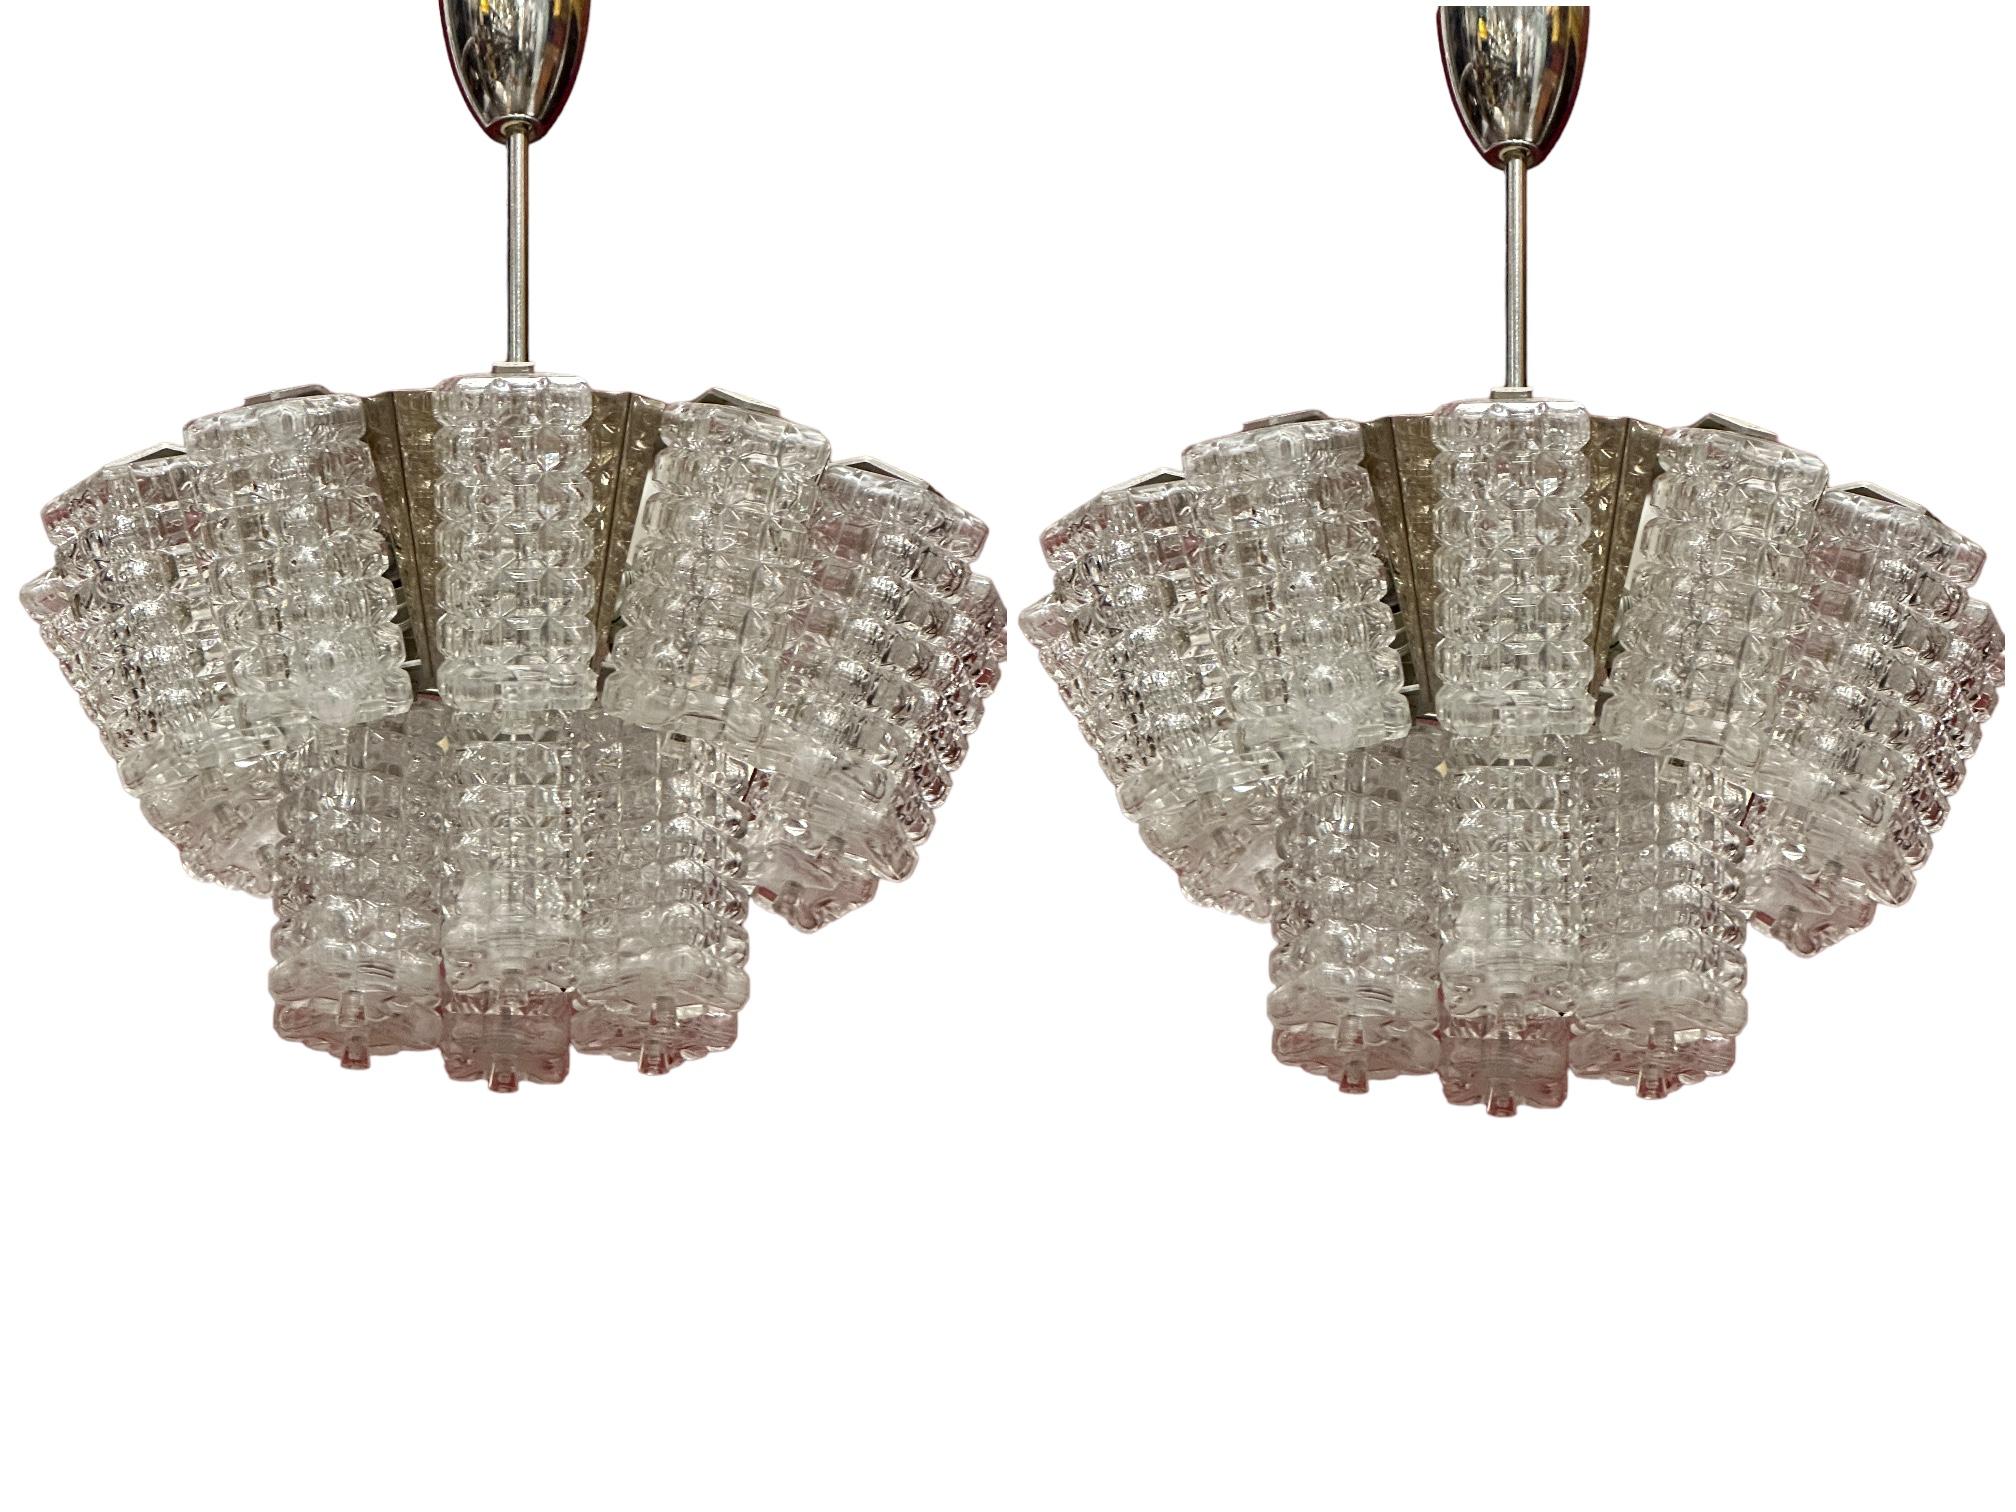 Pair of Two Tiered Glass Cube Chandelier by Austrolux, Austria, 1960s For Sale 2